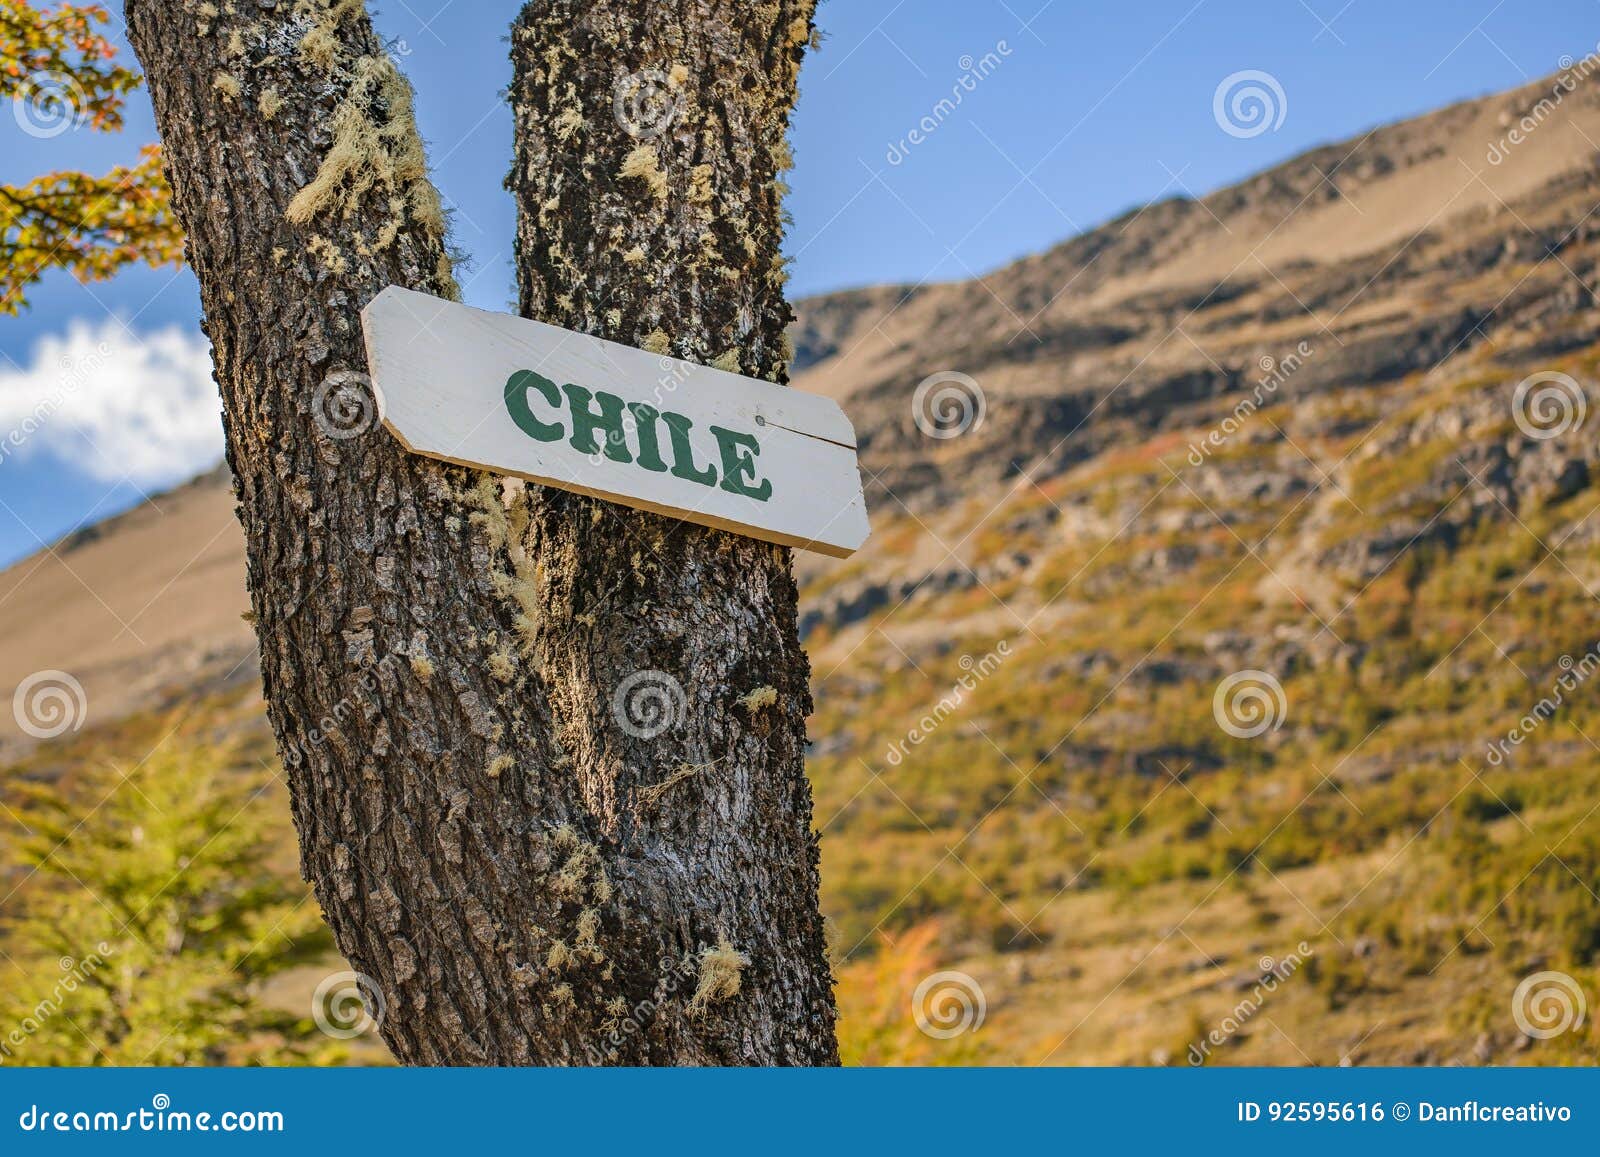 chile letter banner at patagonia